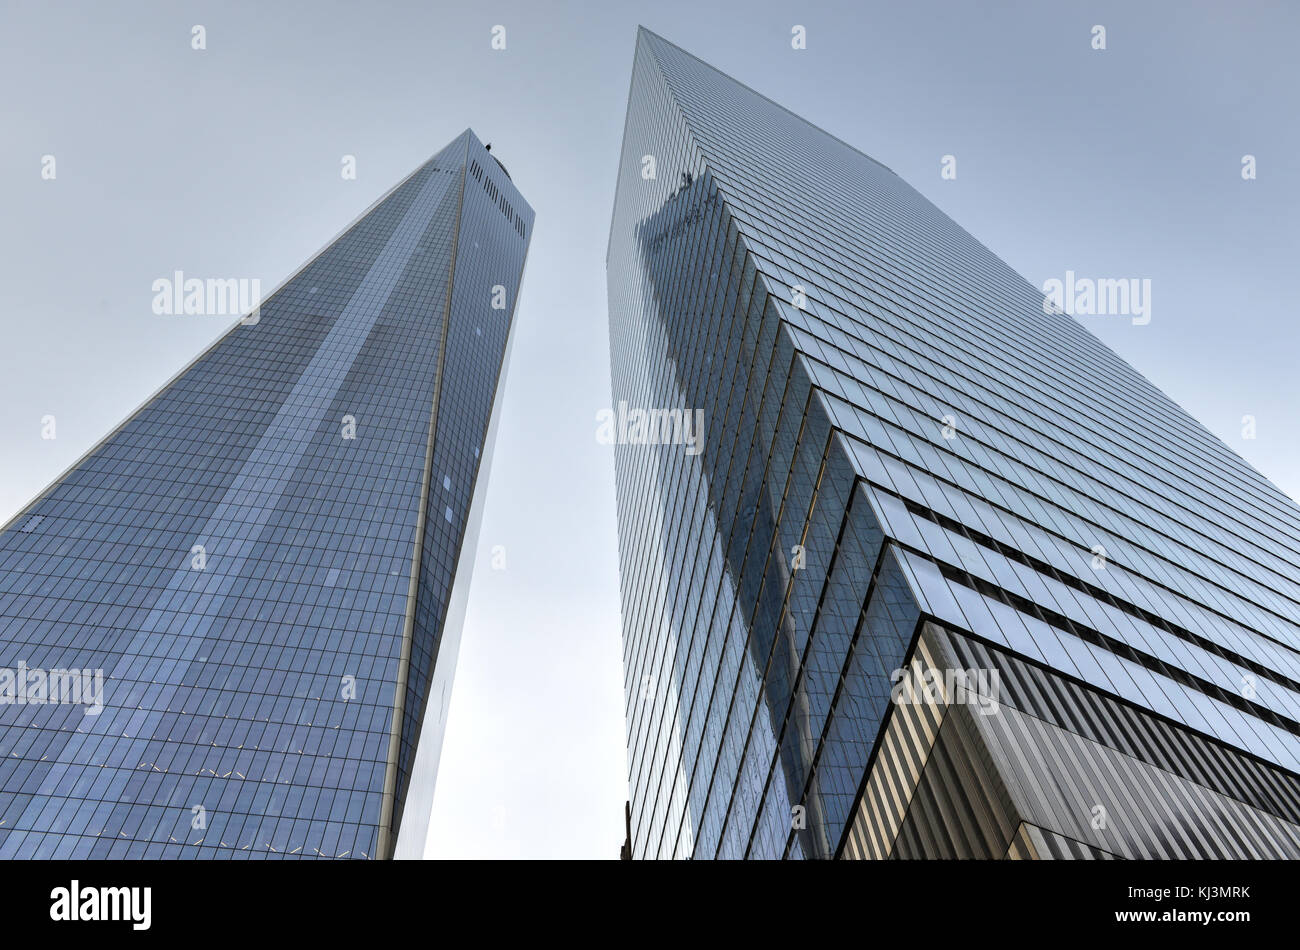 1 WTC and 7 WTC side by side in Lower Manhattan. One World Trade Center is the tallest building in the Western Hemisphere and the third-tallest buildi Stock Photo